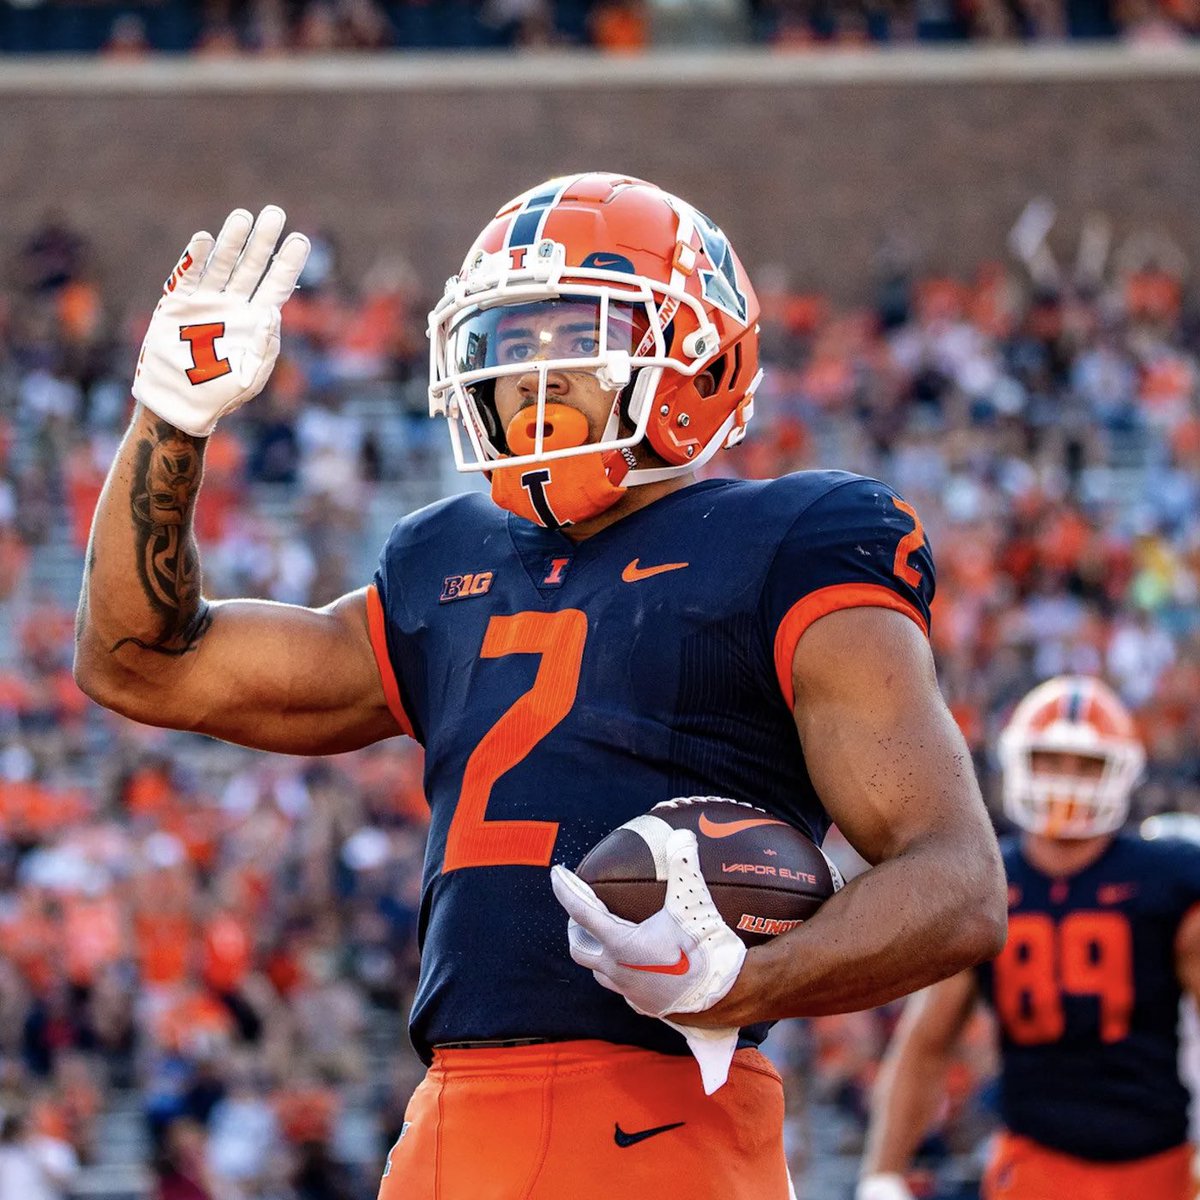 BLESSED to receive an offer from Illinois🧡🤍@RisingStars6 @BellevilleFB